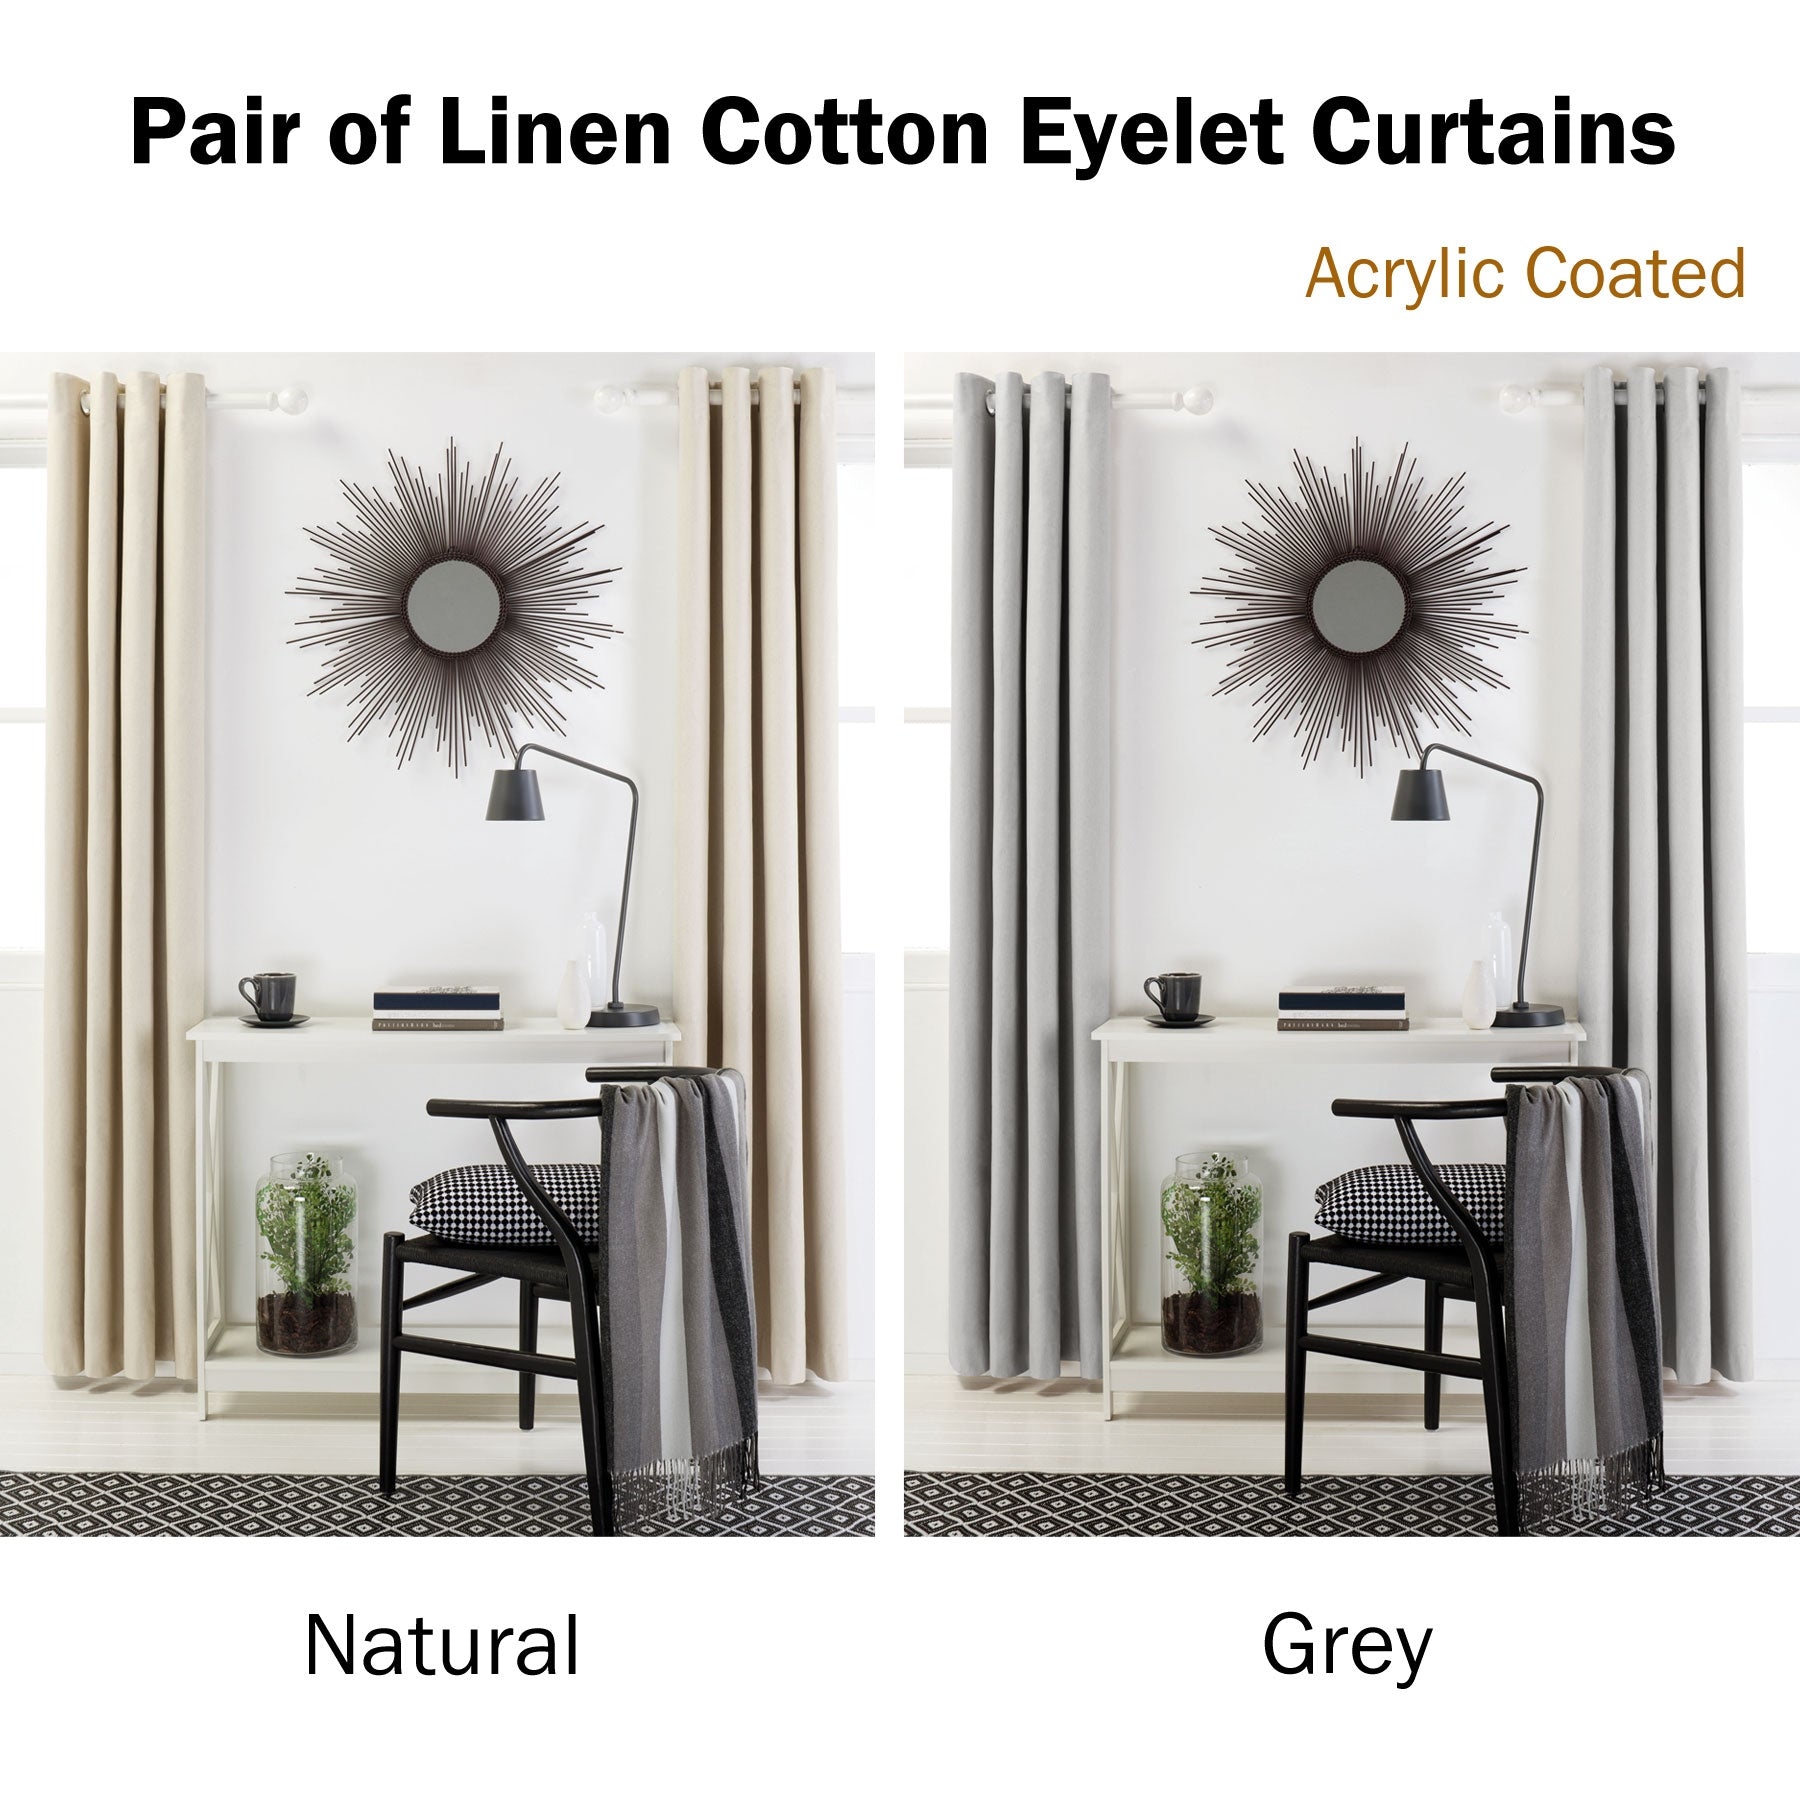 Designers Choice Pair of Linen Cotton Coated Eyelet Curtains Natural 140 x 213cm - SILBERSHELL